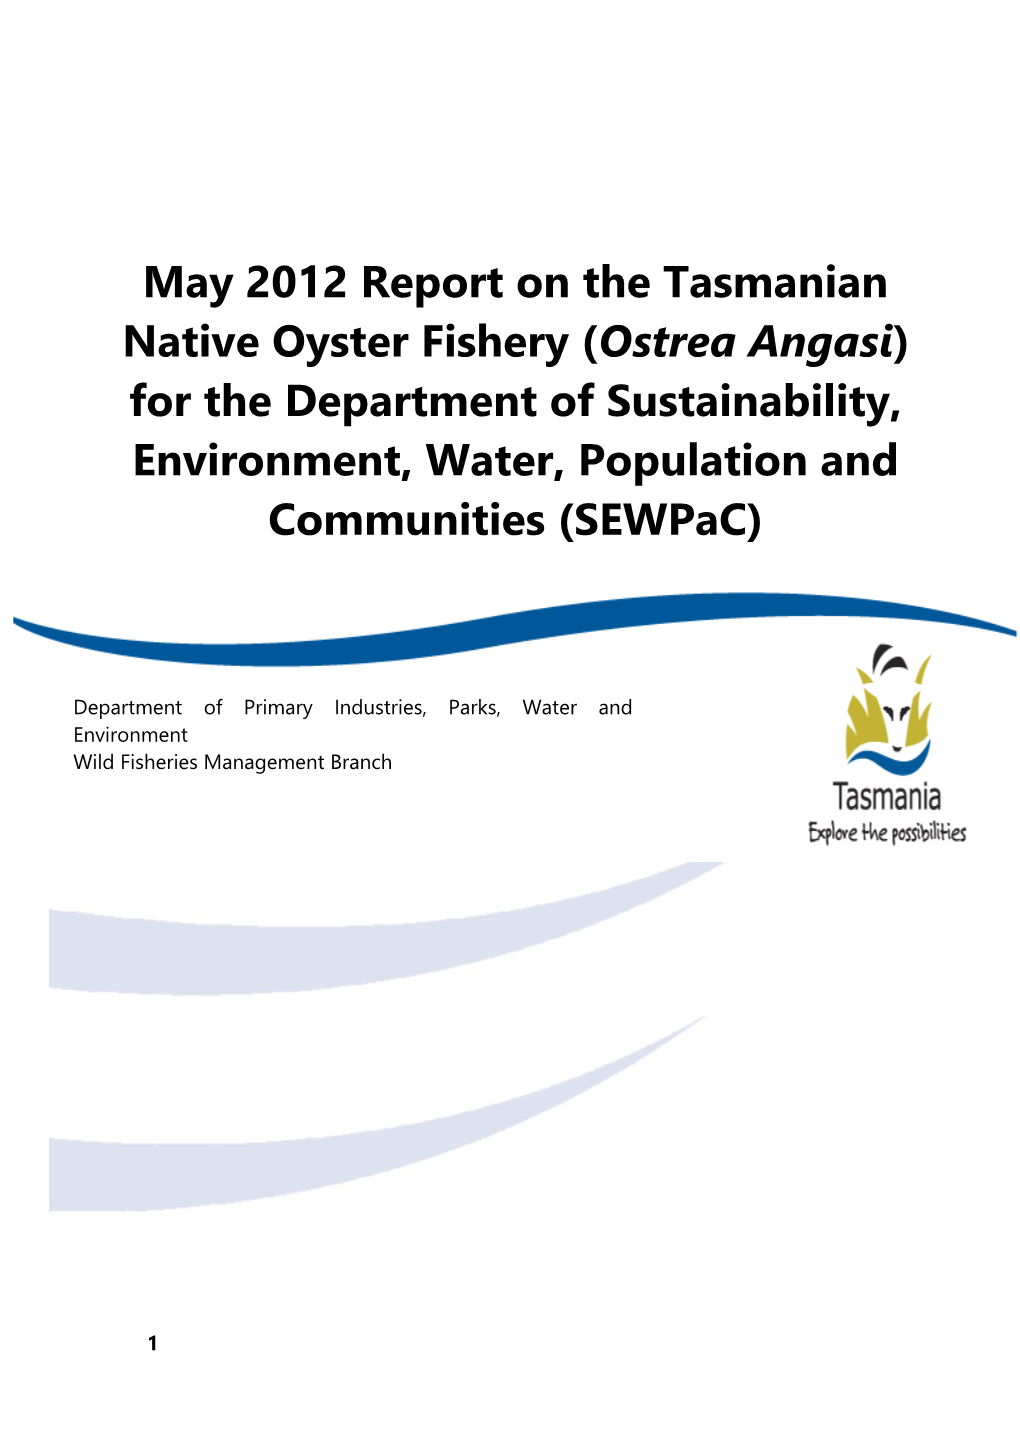 May 2012 Report on the Tasmanian Native Oyster Fishery (Ostrea Angasi) for the Department